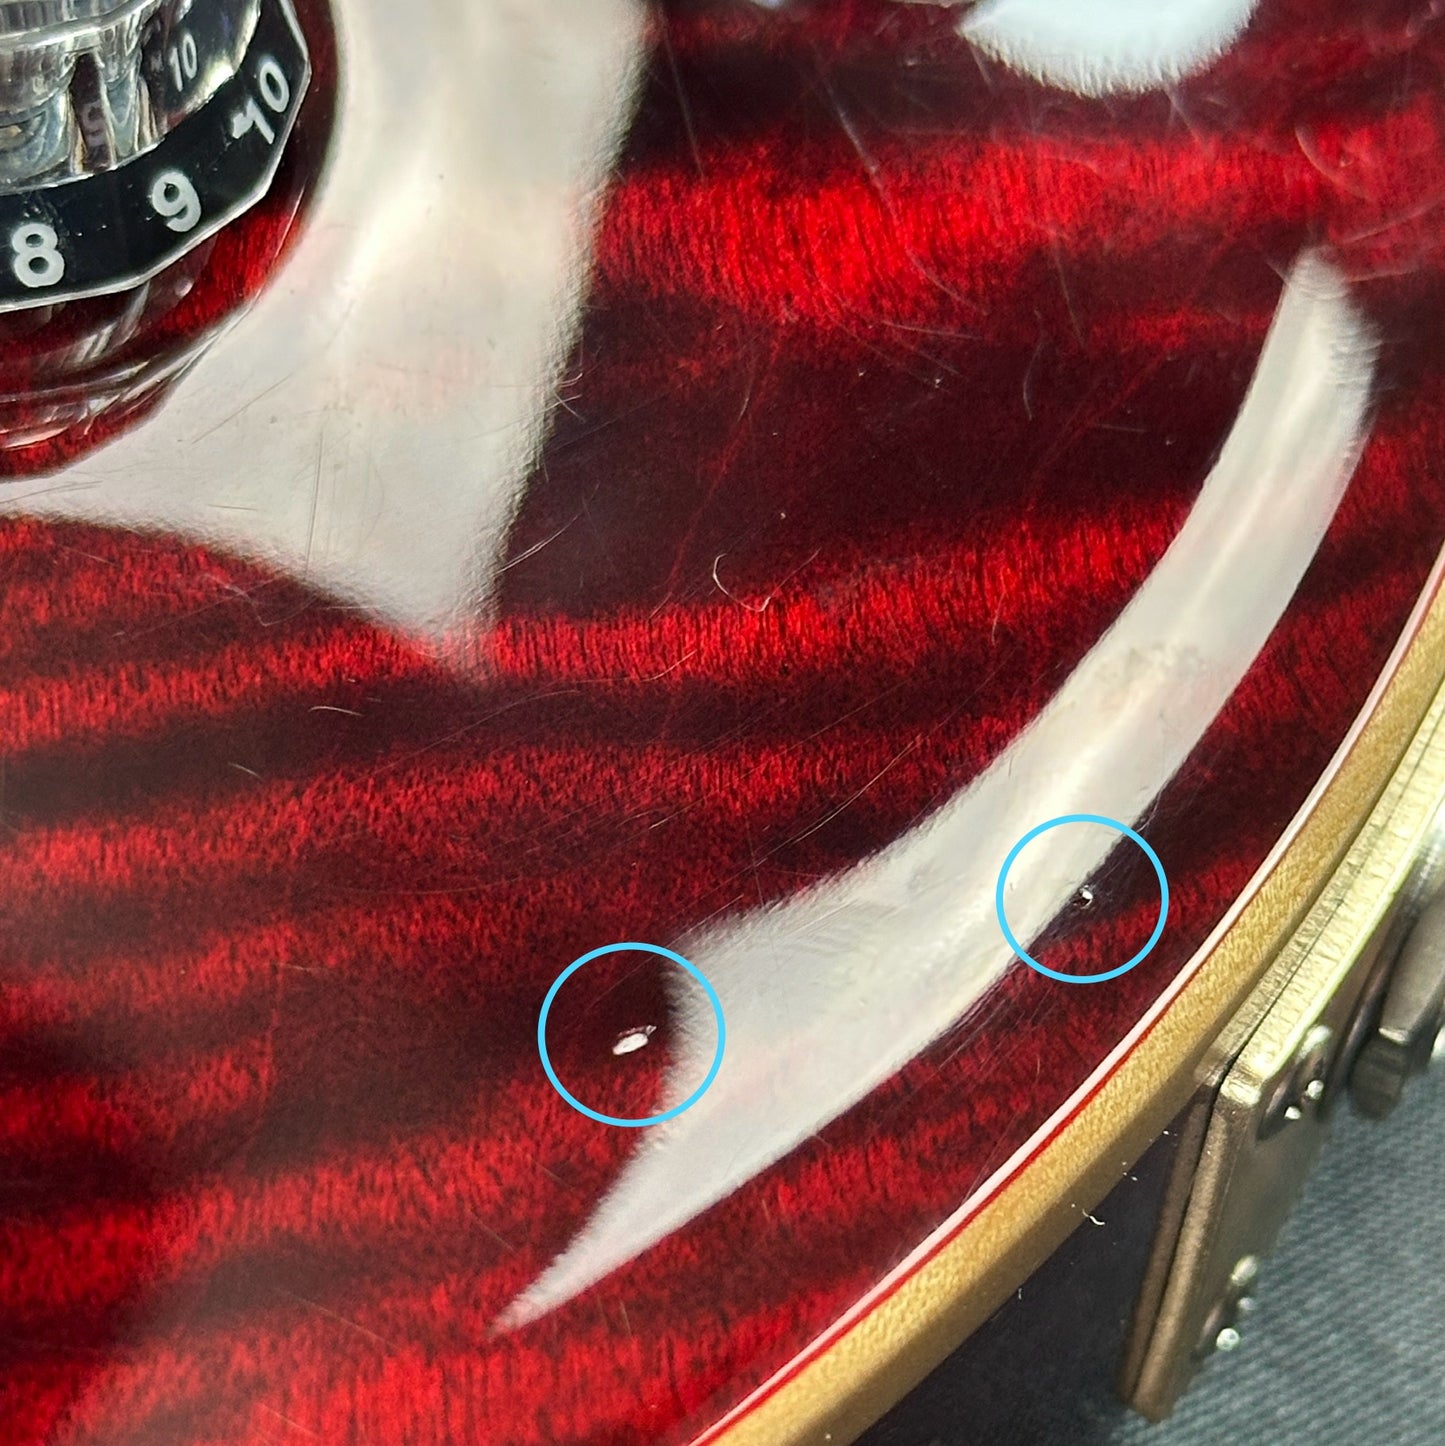 Small dings nad scratches near output jack of Used 2019 PRS McCarty 594 Scarlet.